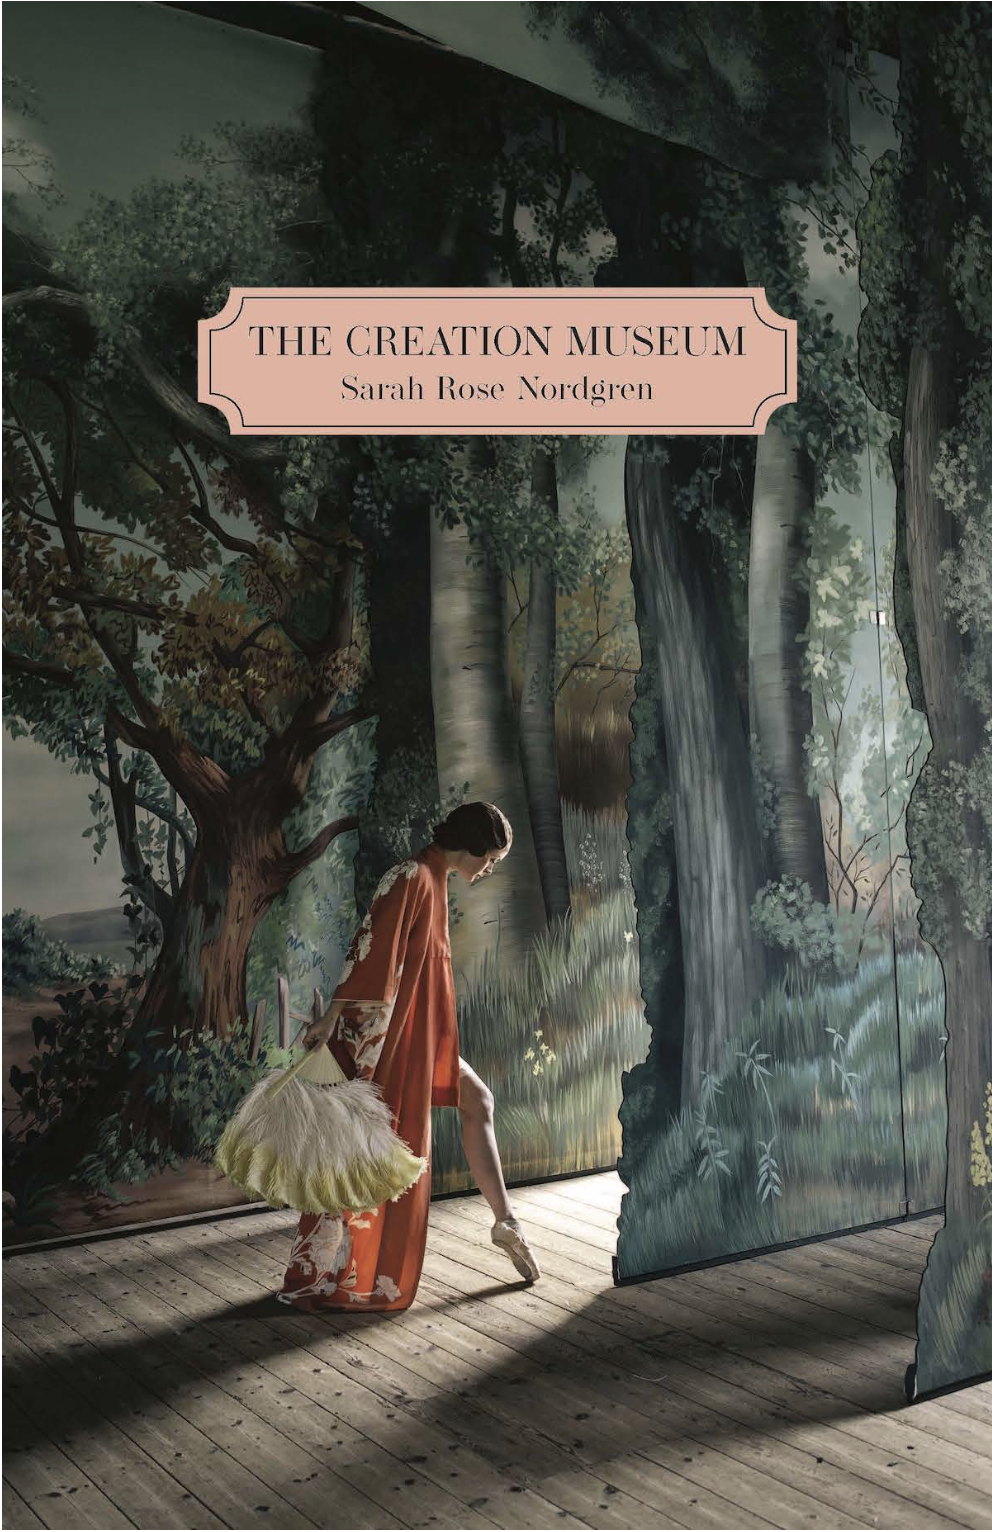 The Creation Museum by Sarah Rose Nordgren